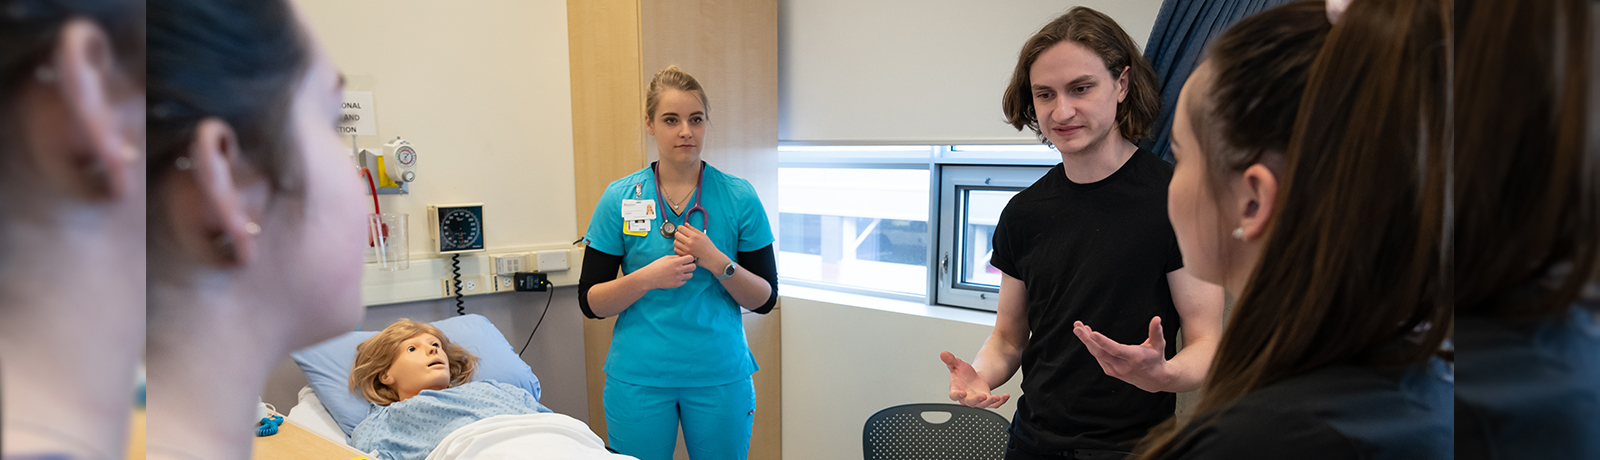 Three MacEwan students stand around a hospital bed with a nurse dressed in green scrubs. They talk while examining a training mannequin in the hospital bed.